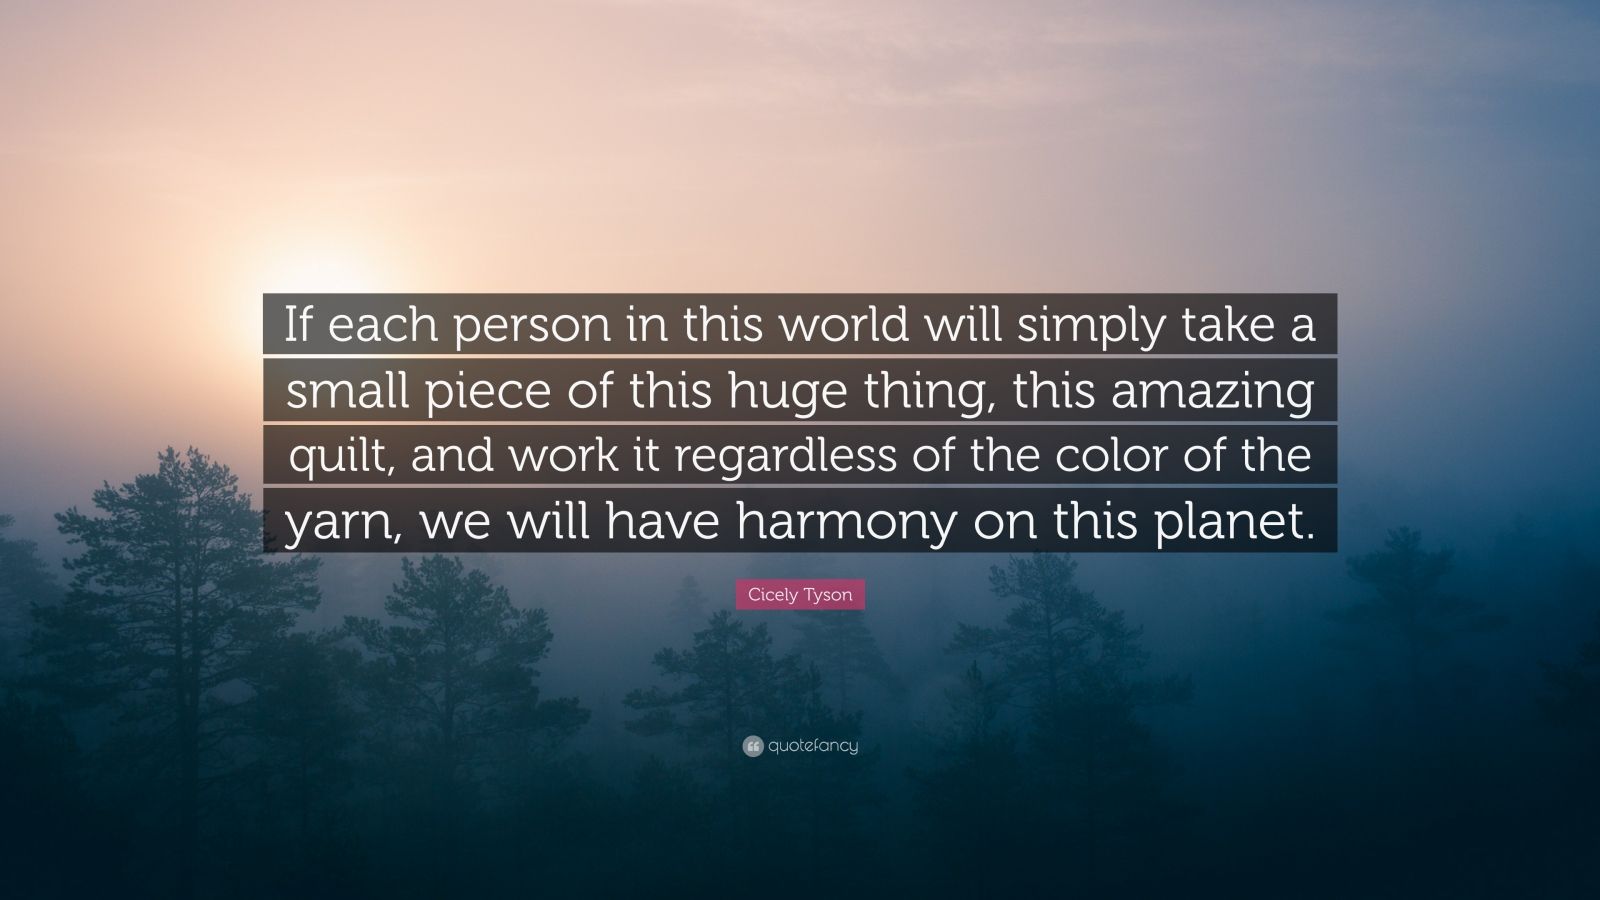 Cicely Tyson Quote: "If each person in this world will ...